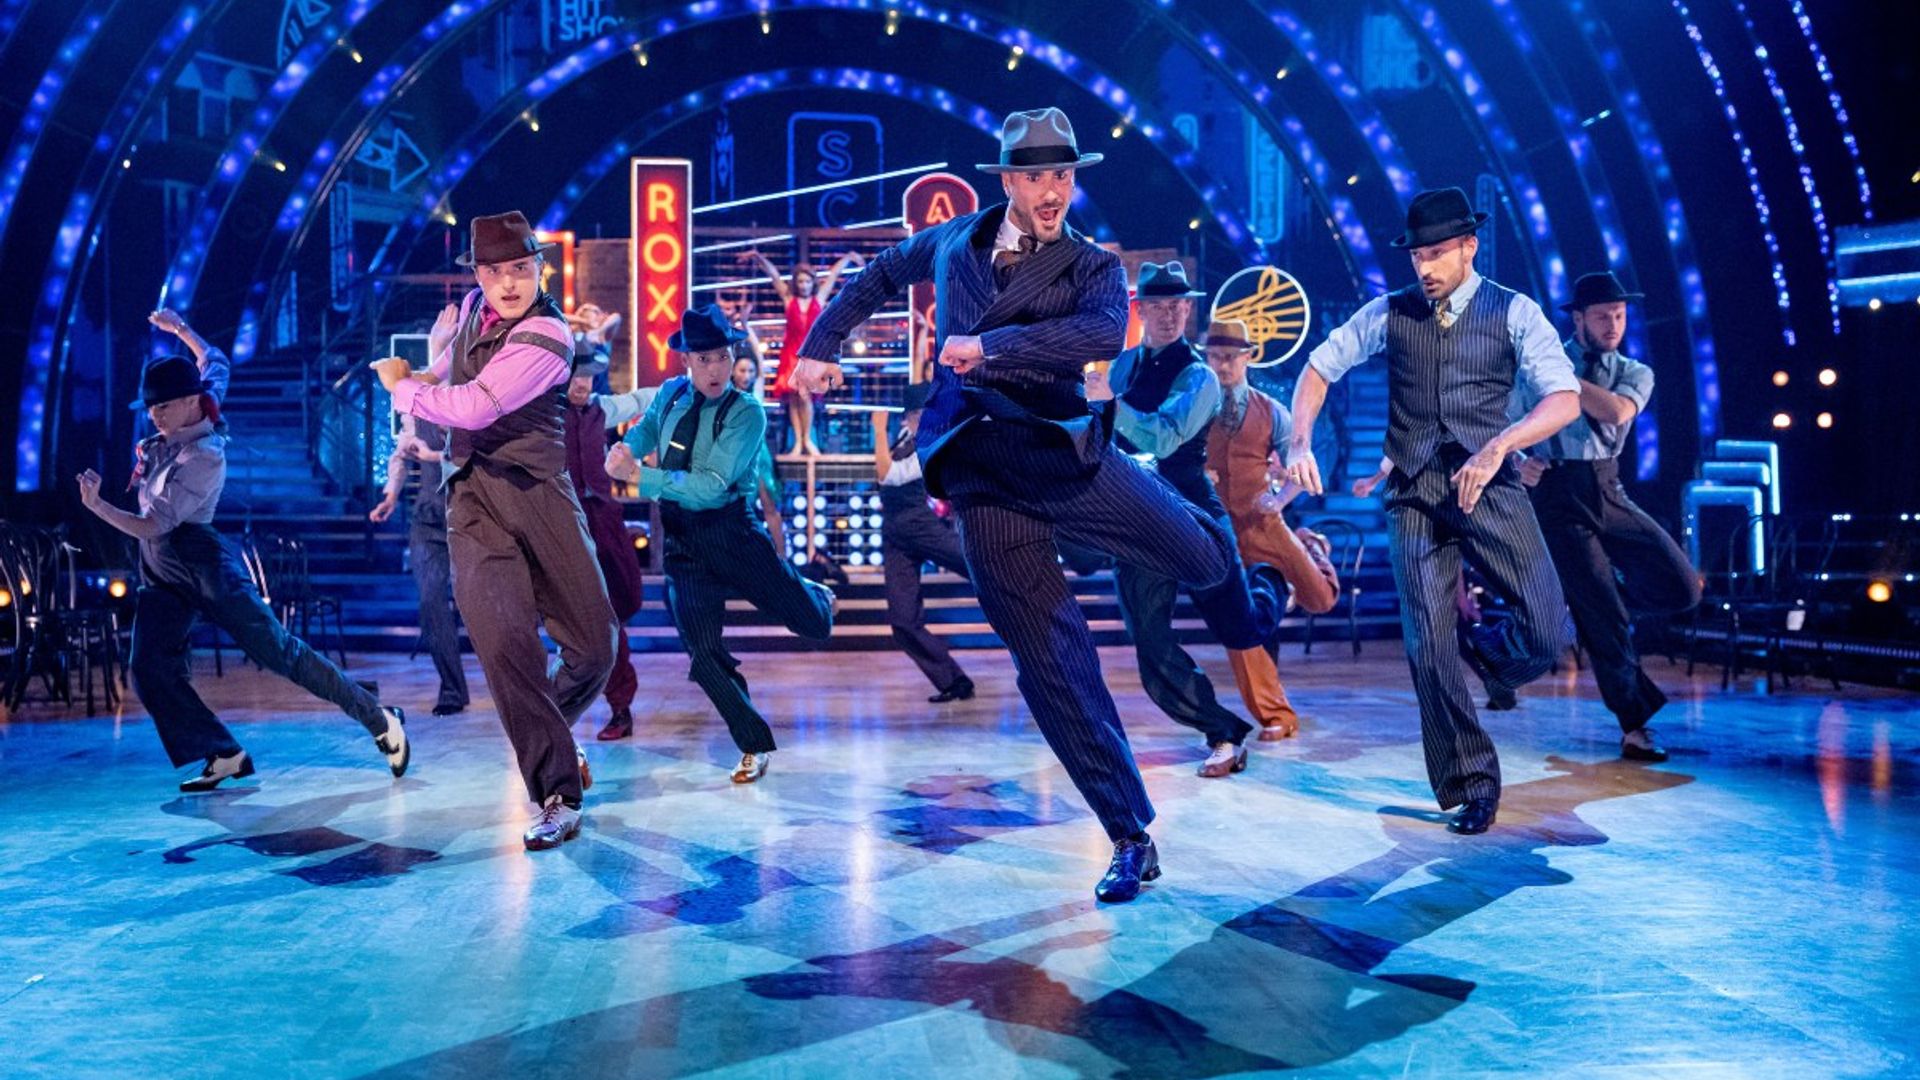 BBC defends Strictly Come Dancing controversy in new statement 